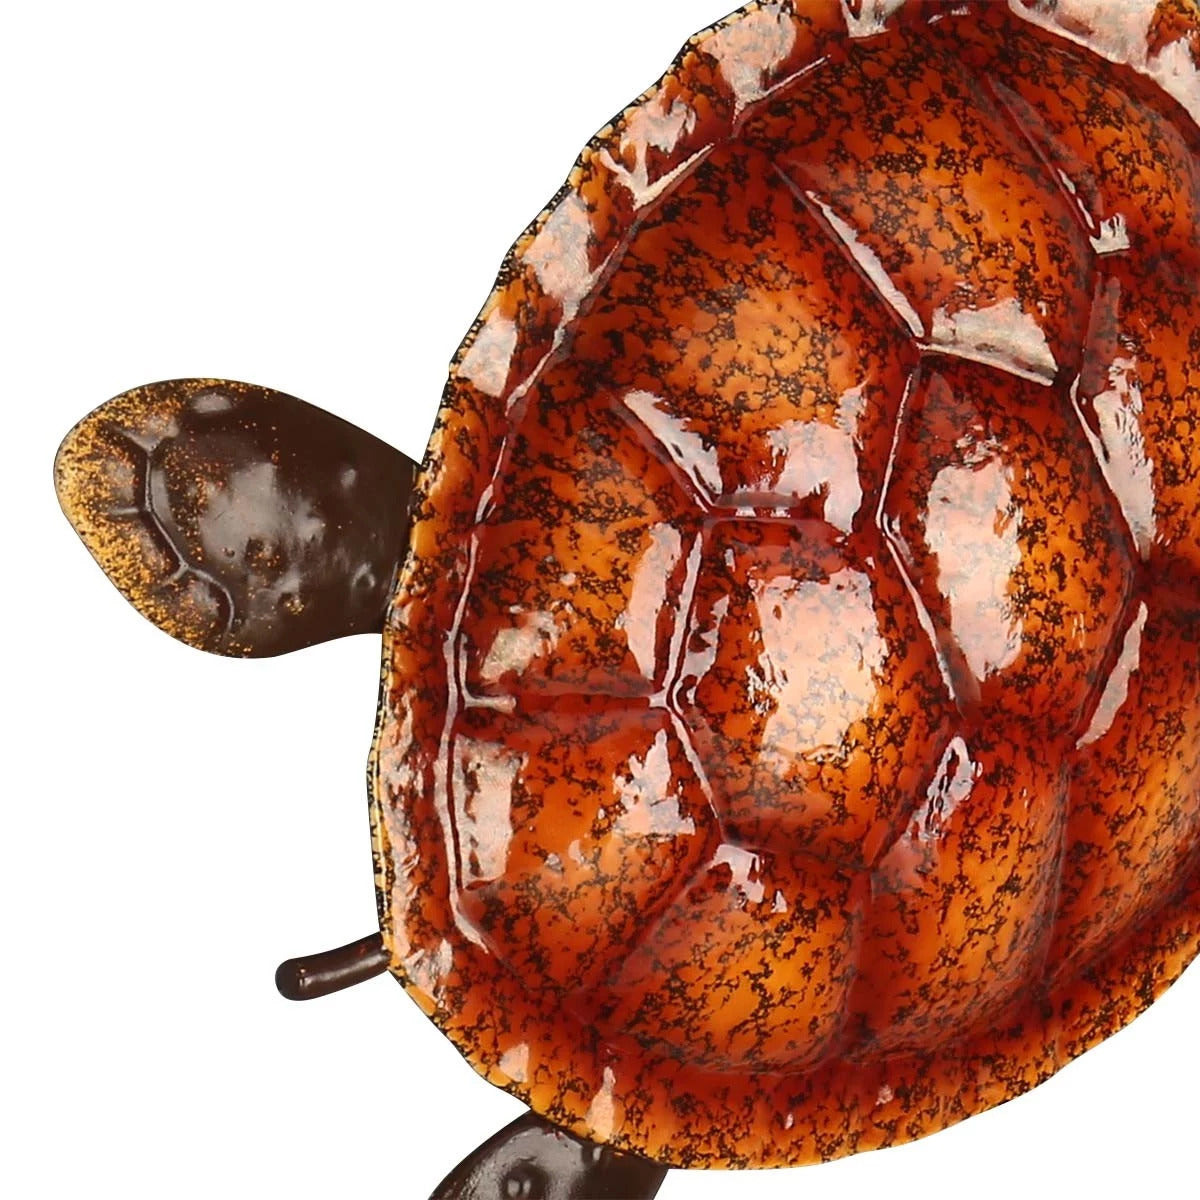 Cute and Baby Sea Turtle Wall Art Decor by Metal Ocean Figurines